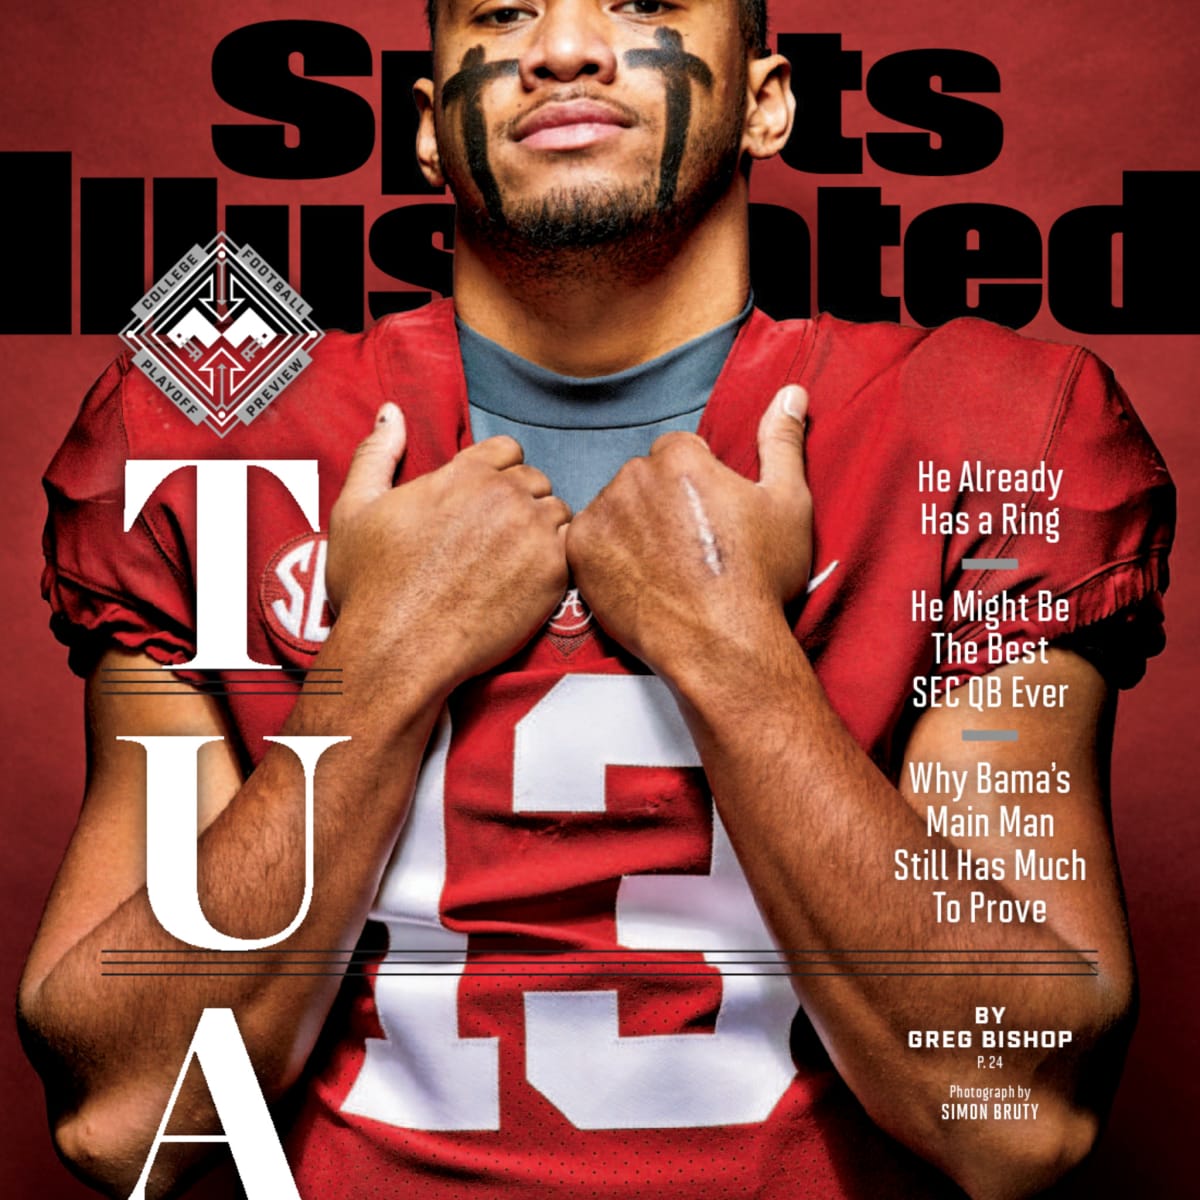 The banged-up 49ers, with injured Rice and Young, humbled by Bucs - Sports  Illustrated Vault